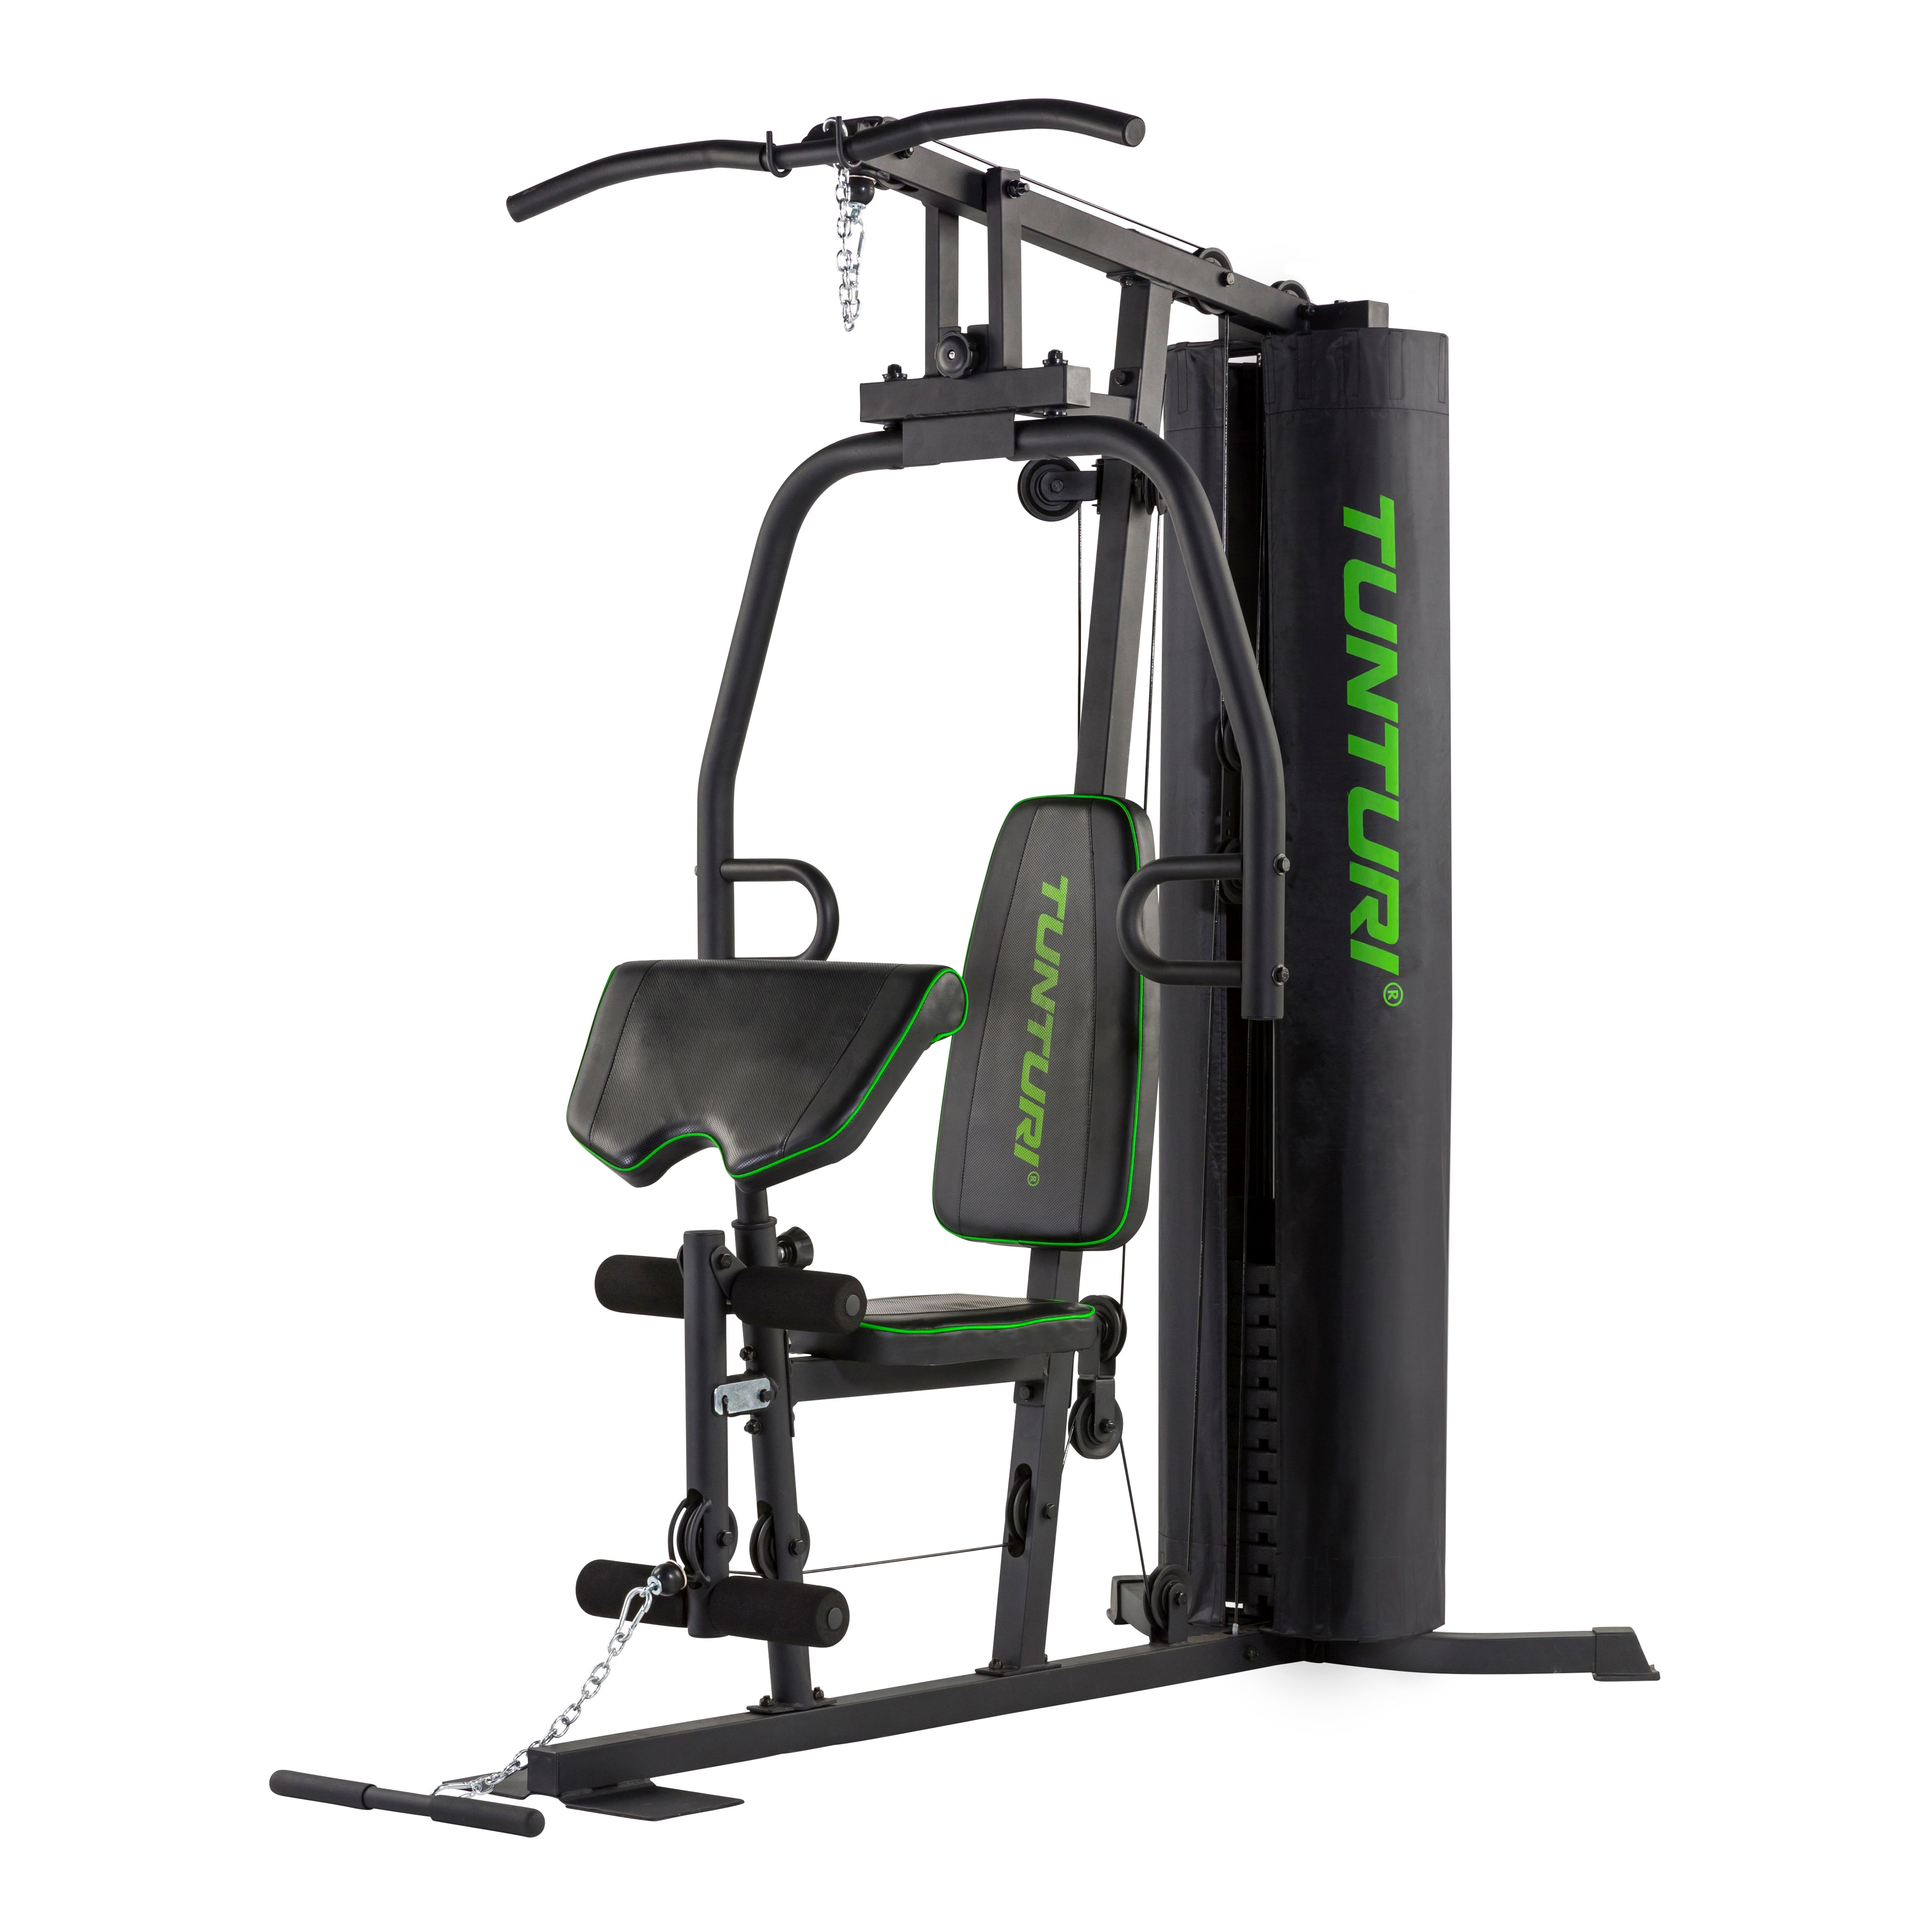 770263 FITNESS MULTIGYM POWERSTATION INCL. 60KG WEIGHTS